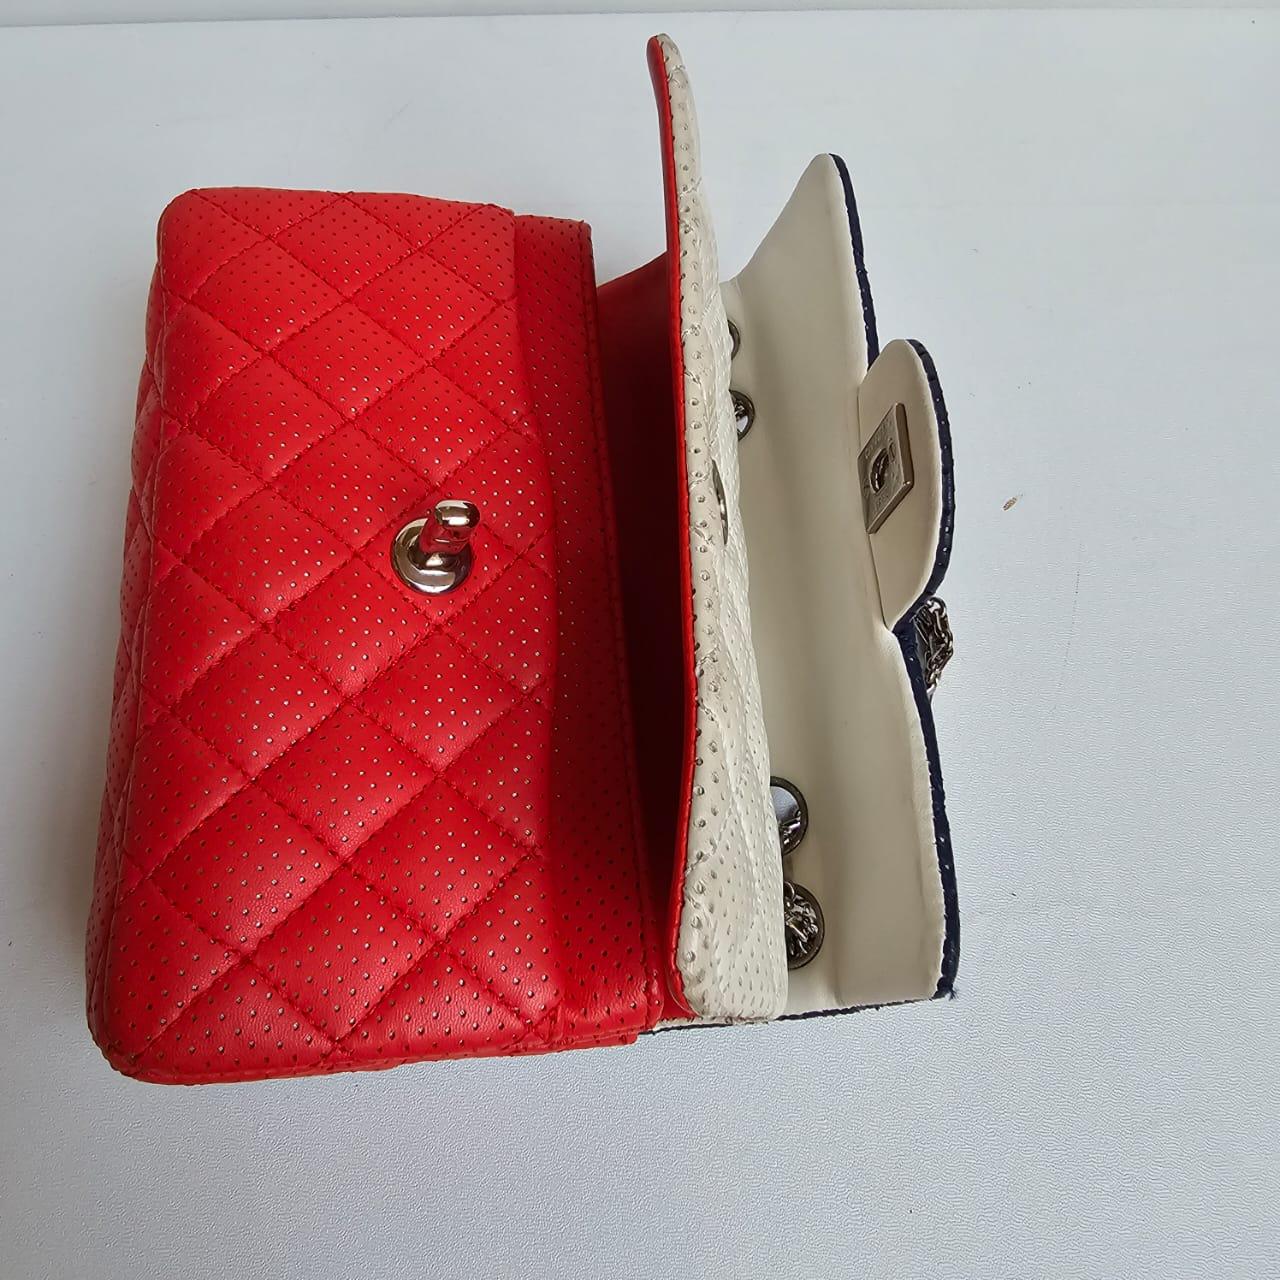 Chanel Tricolor Perforated Mini Rectangle Flap Bag For Sale 6